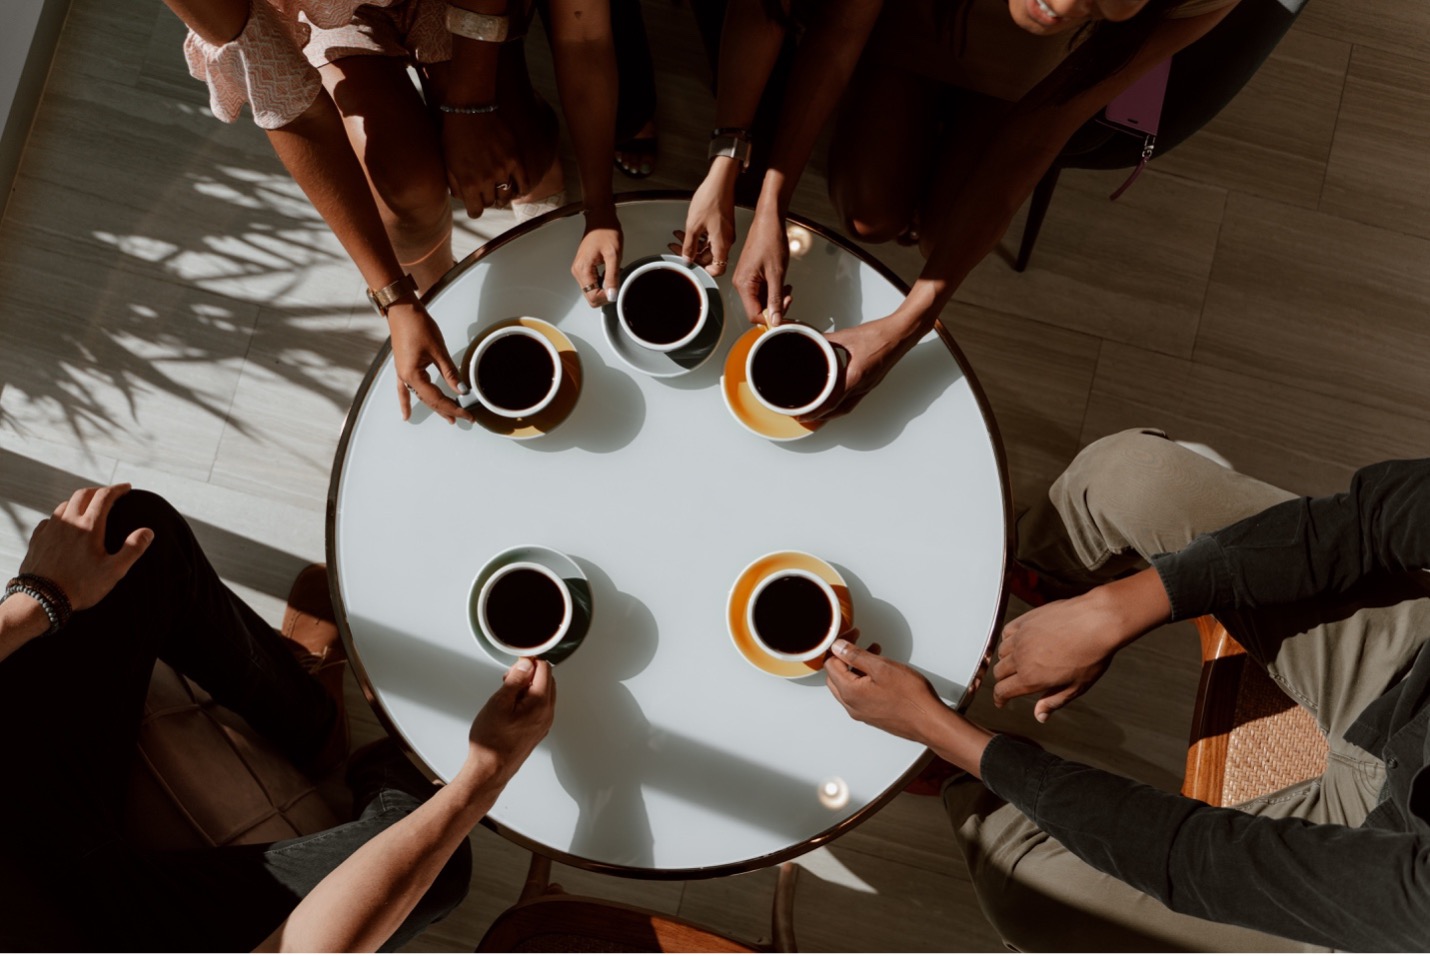 A group of people having coffee at a table